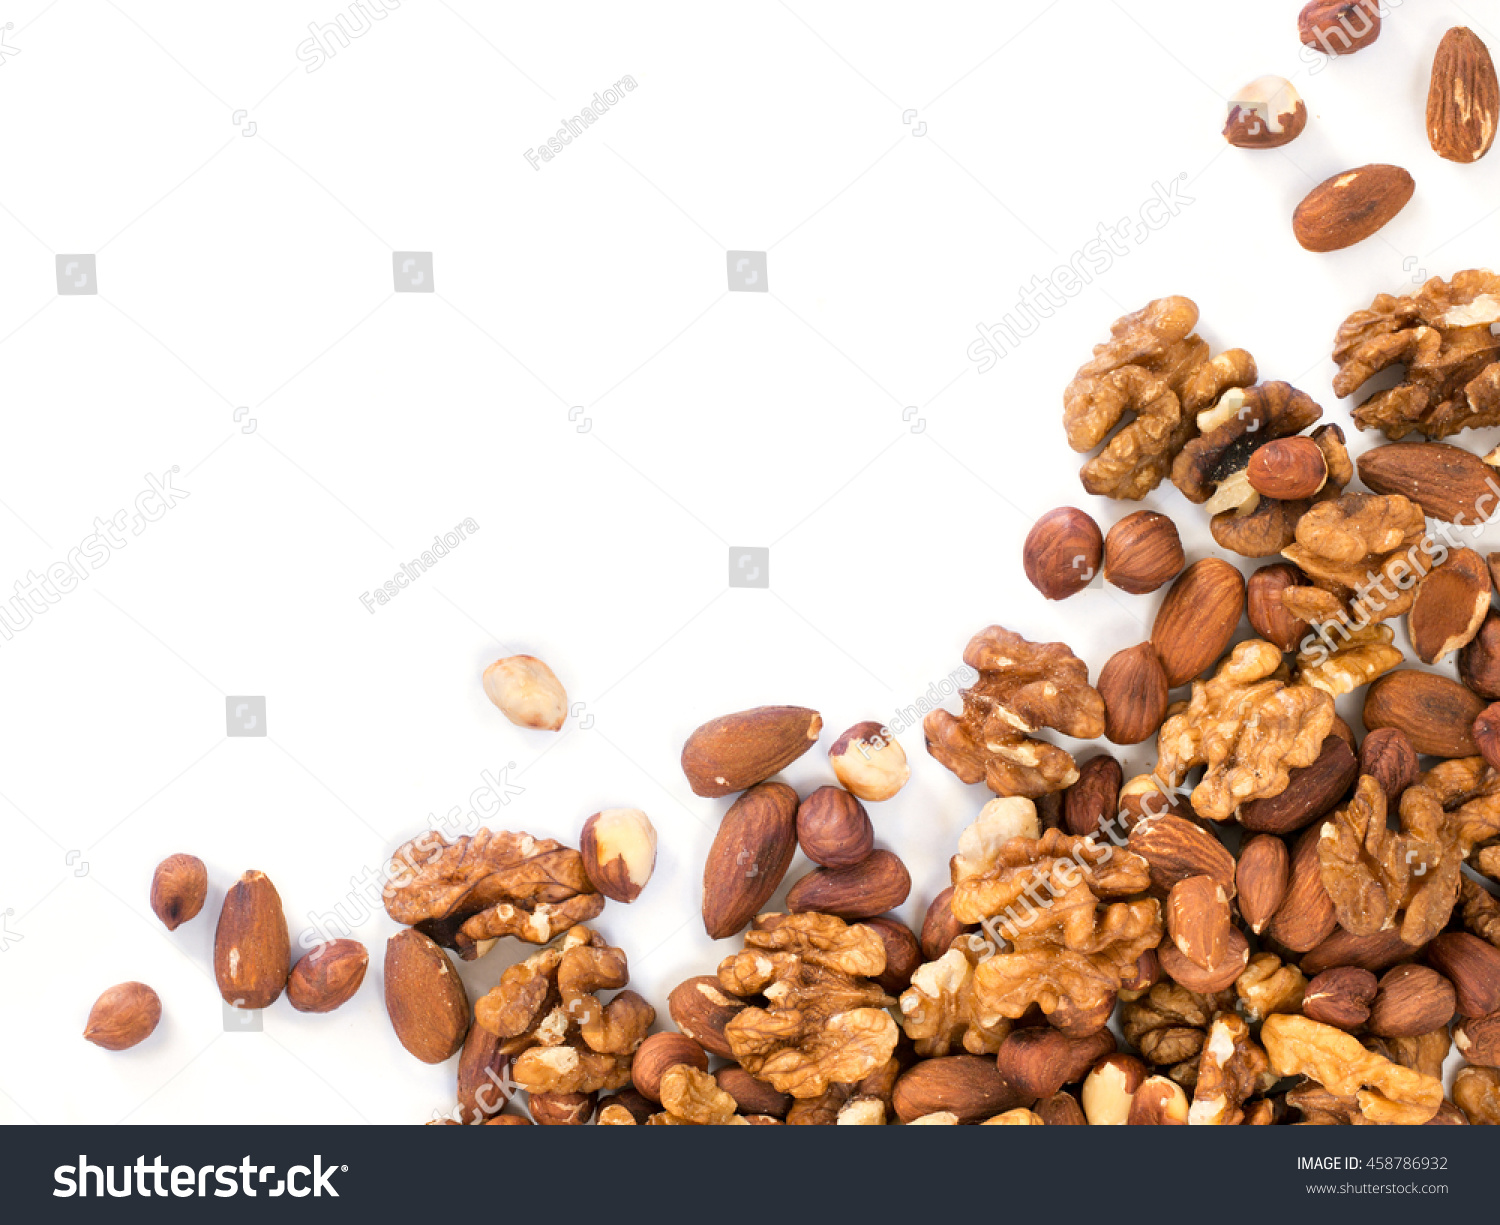 Background of mixed nuts - hazelnuts, walnuts, almonds - with copy space. Isolated one edge. Top view or flat lay #458786932